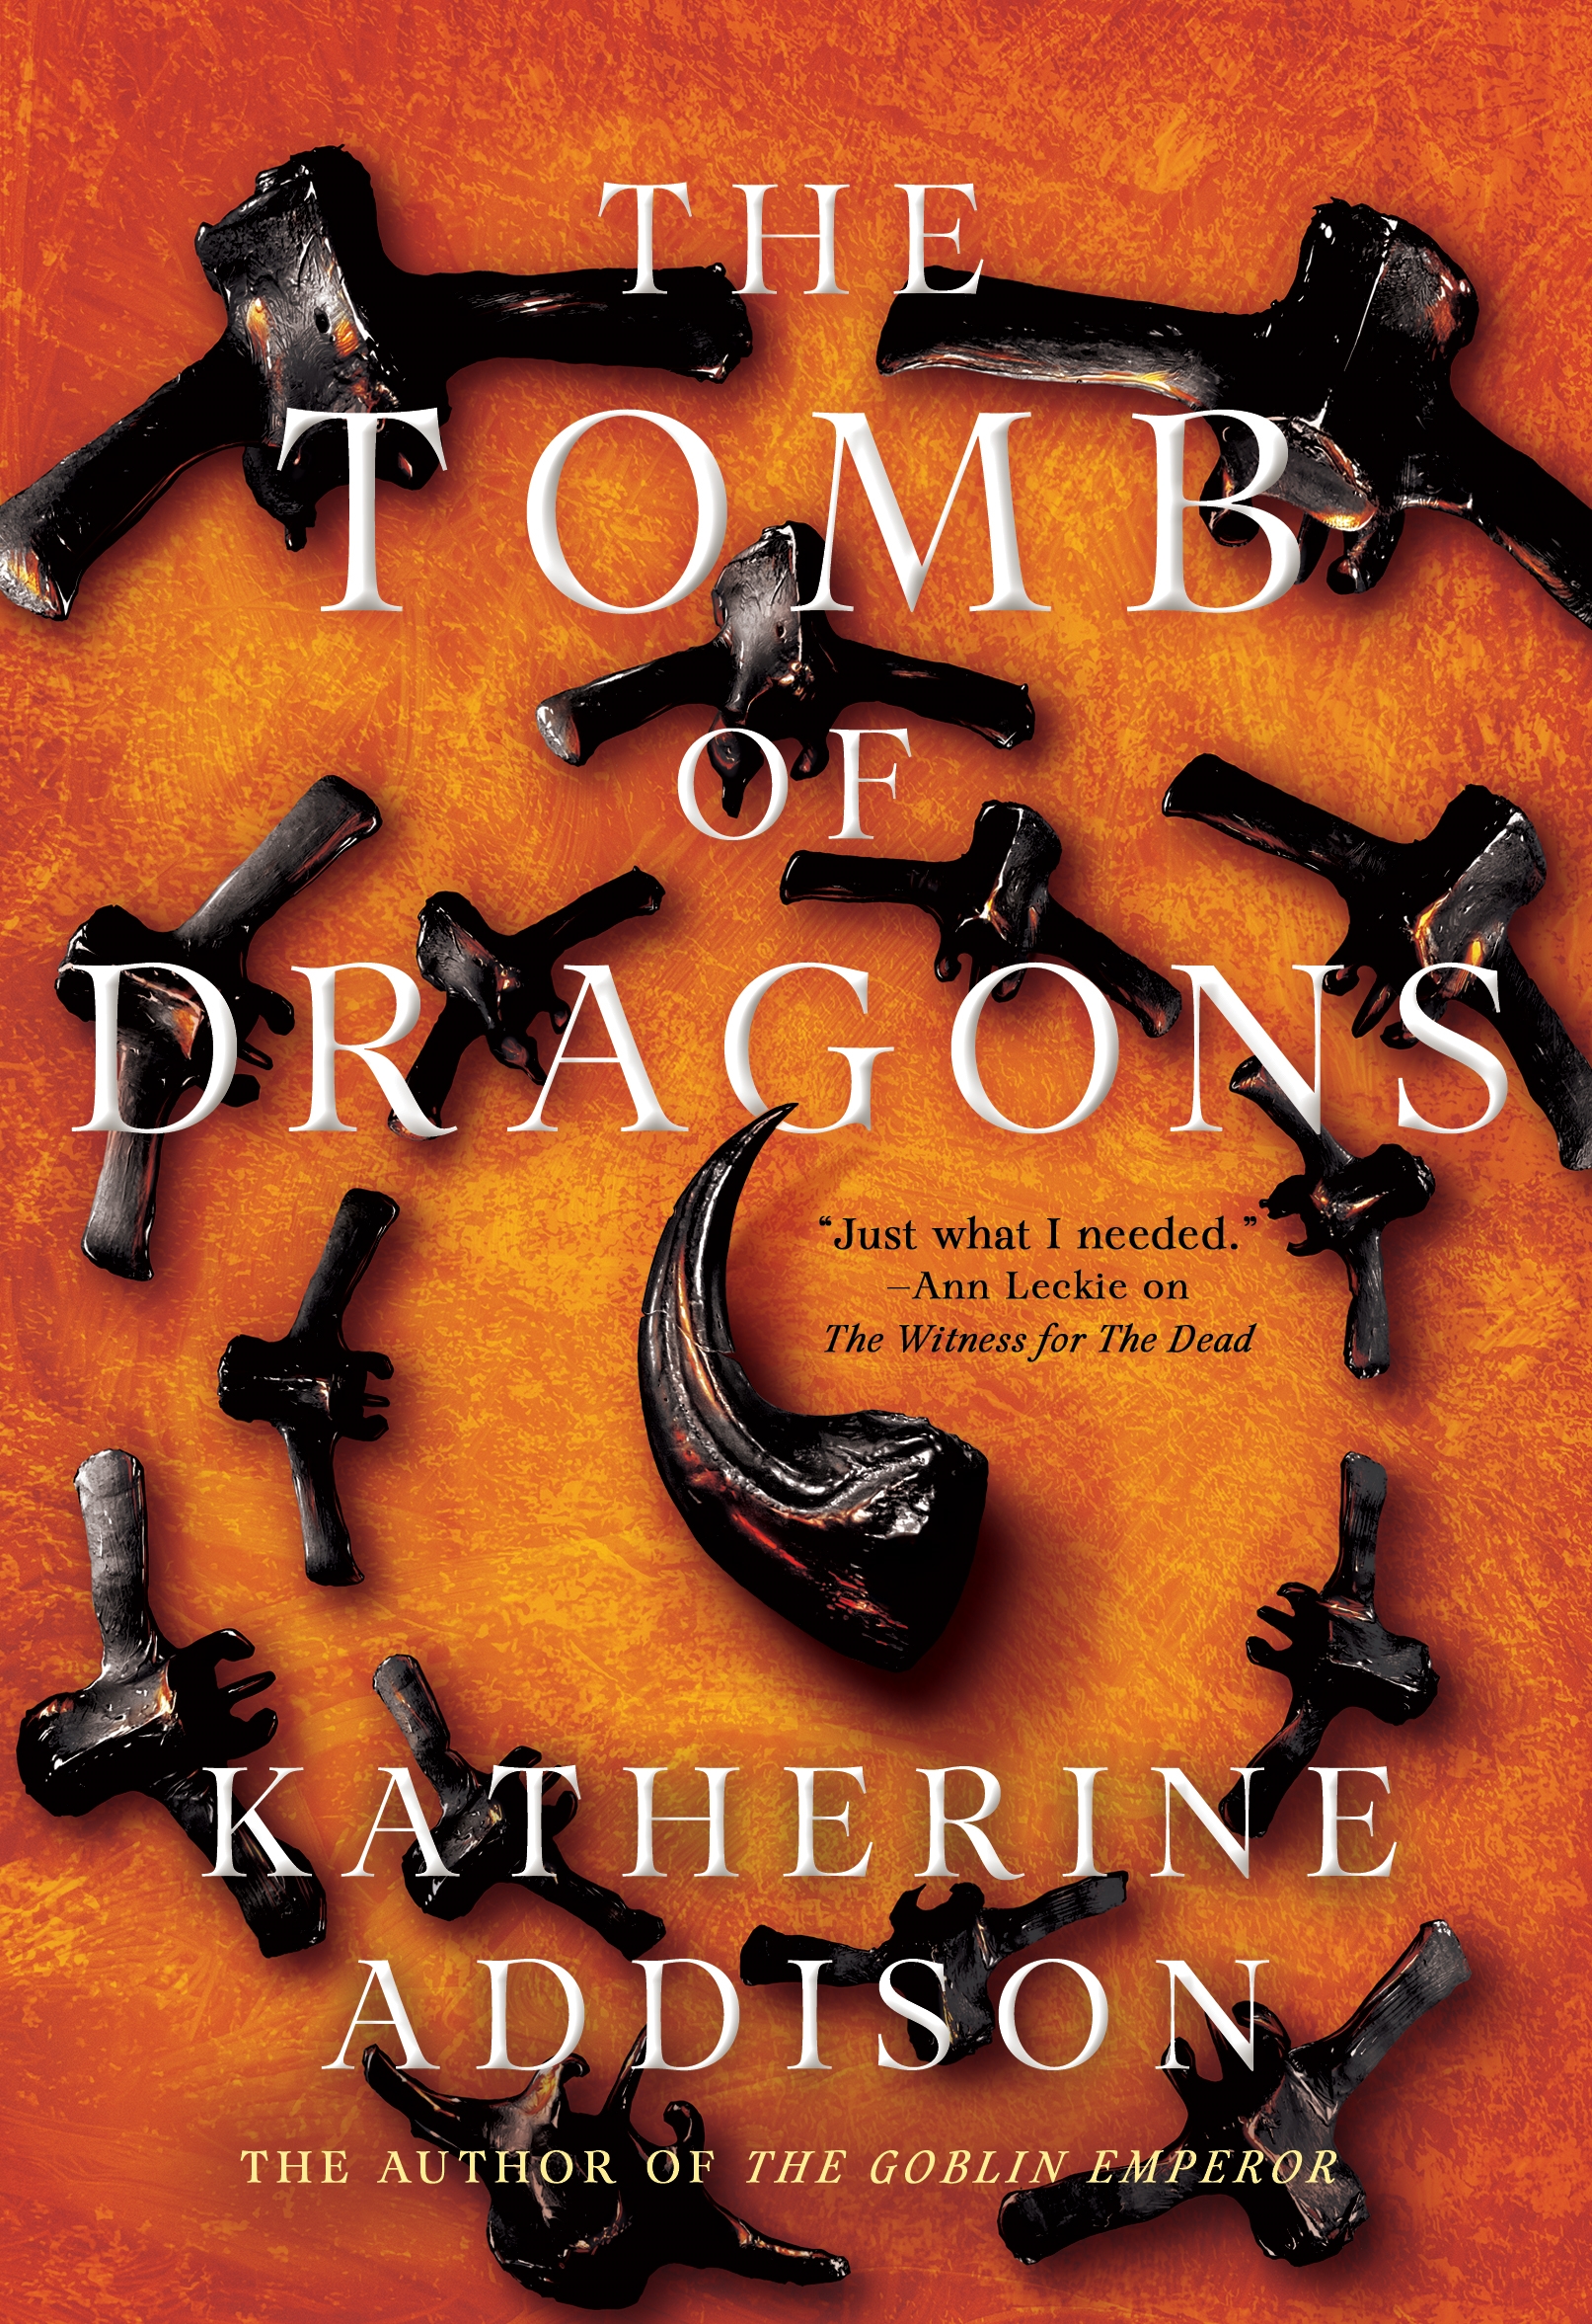 The Tomb of Dragons by Katherine Addison